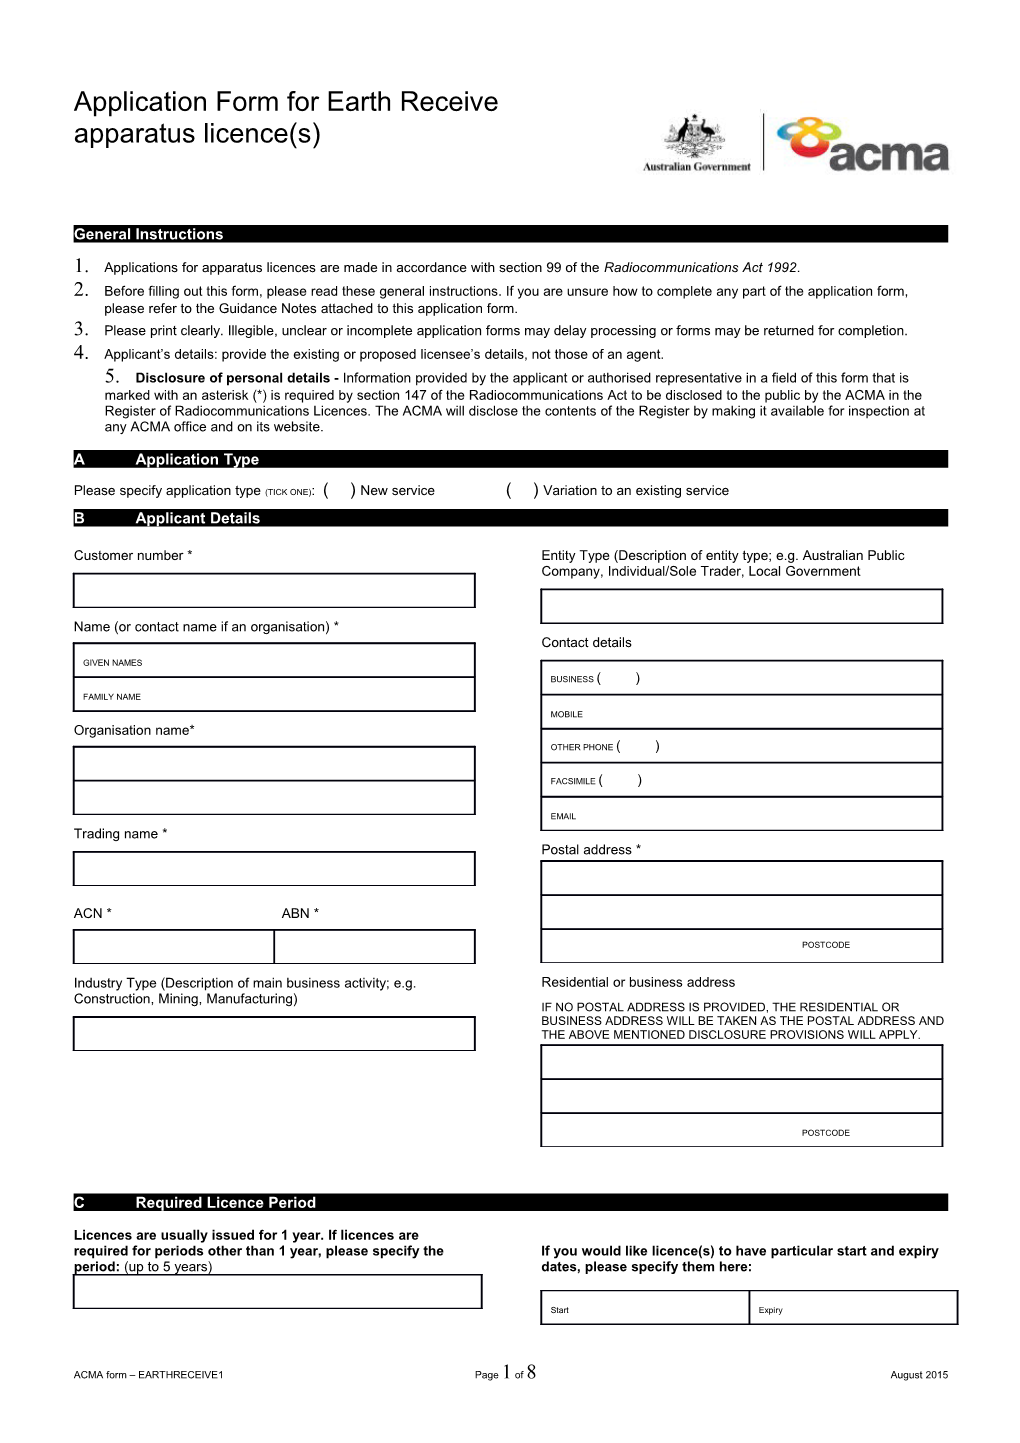 ACMA Form Earthreceive1page 1 of 5August 2015